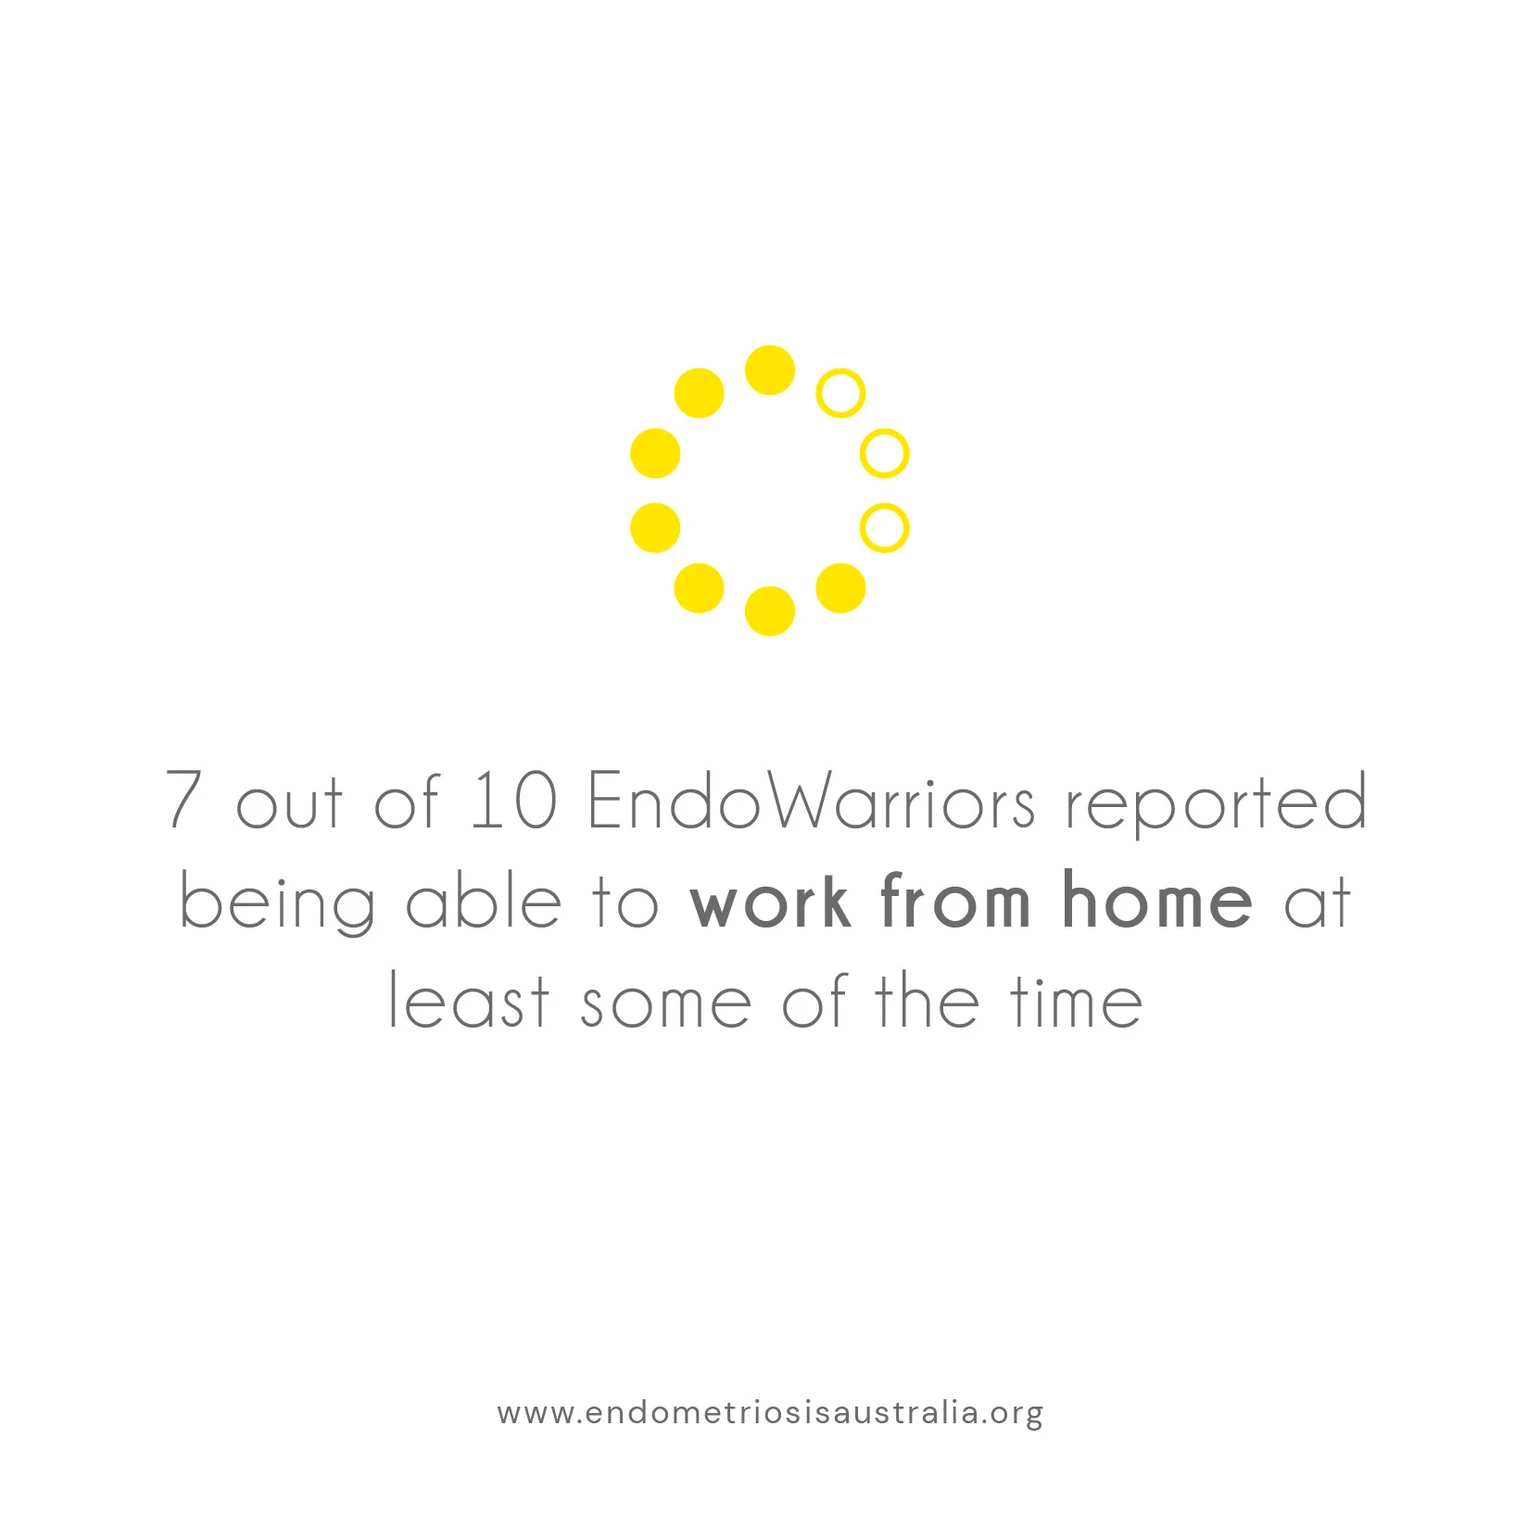 7 out of 10 Endo Warriors reported being able to work from home at least some of the time.